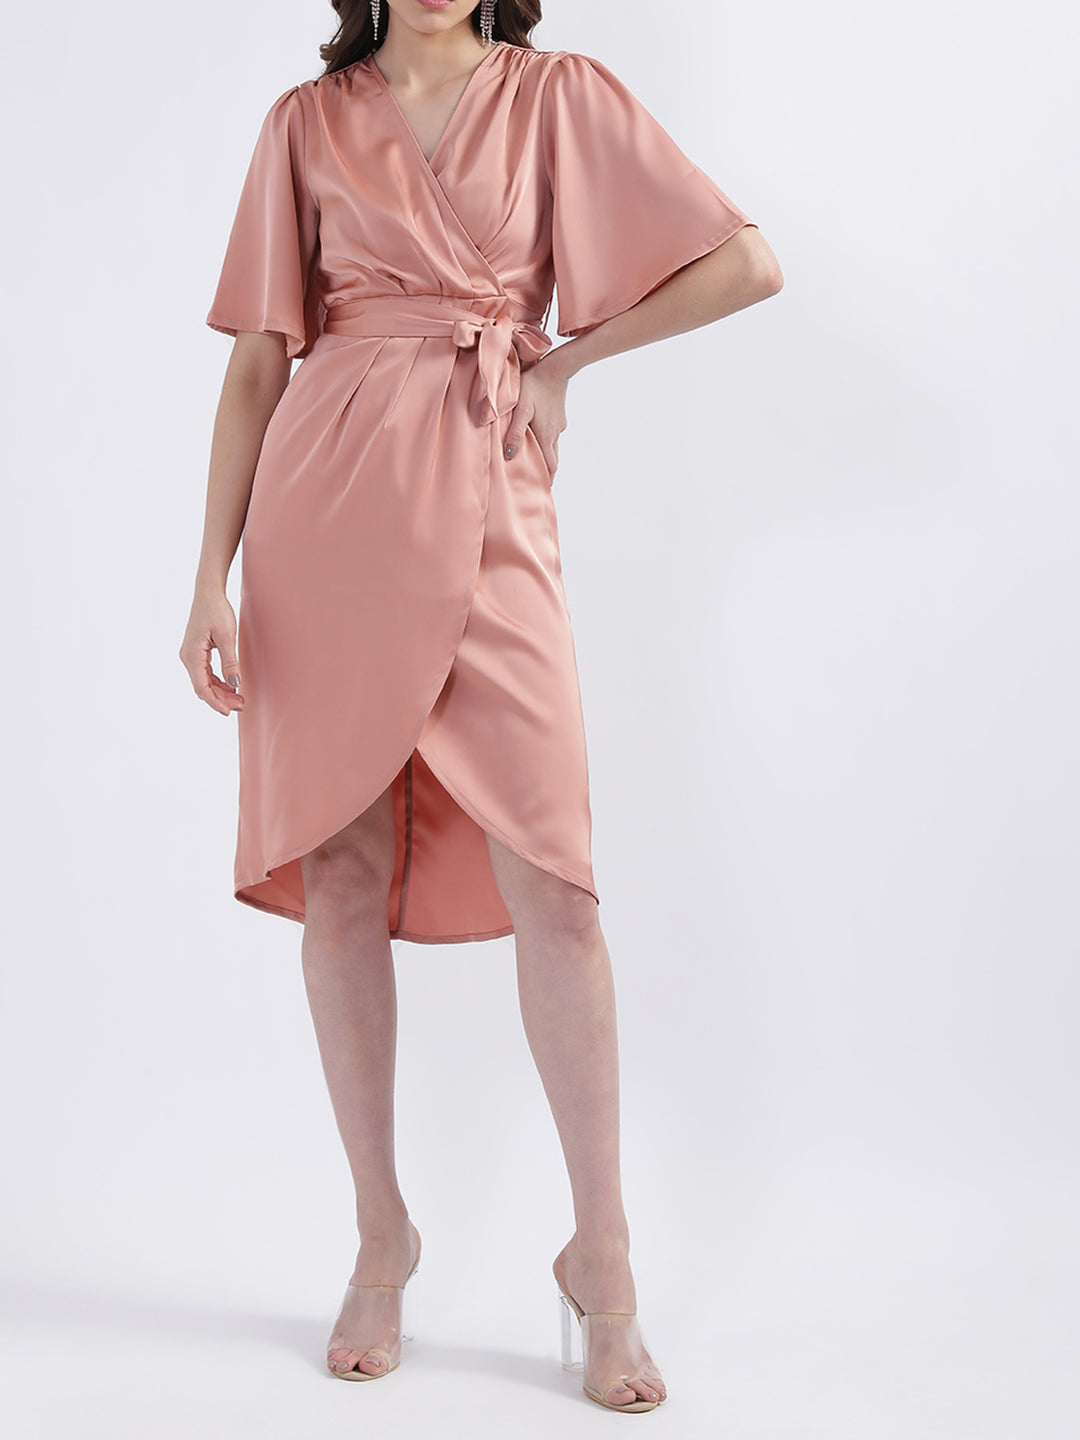 Centre Stage Women Peach Solid V Neck Dress